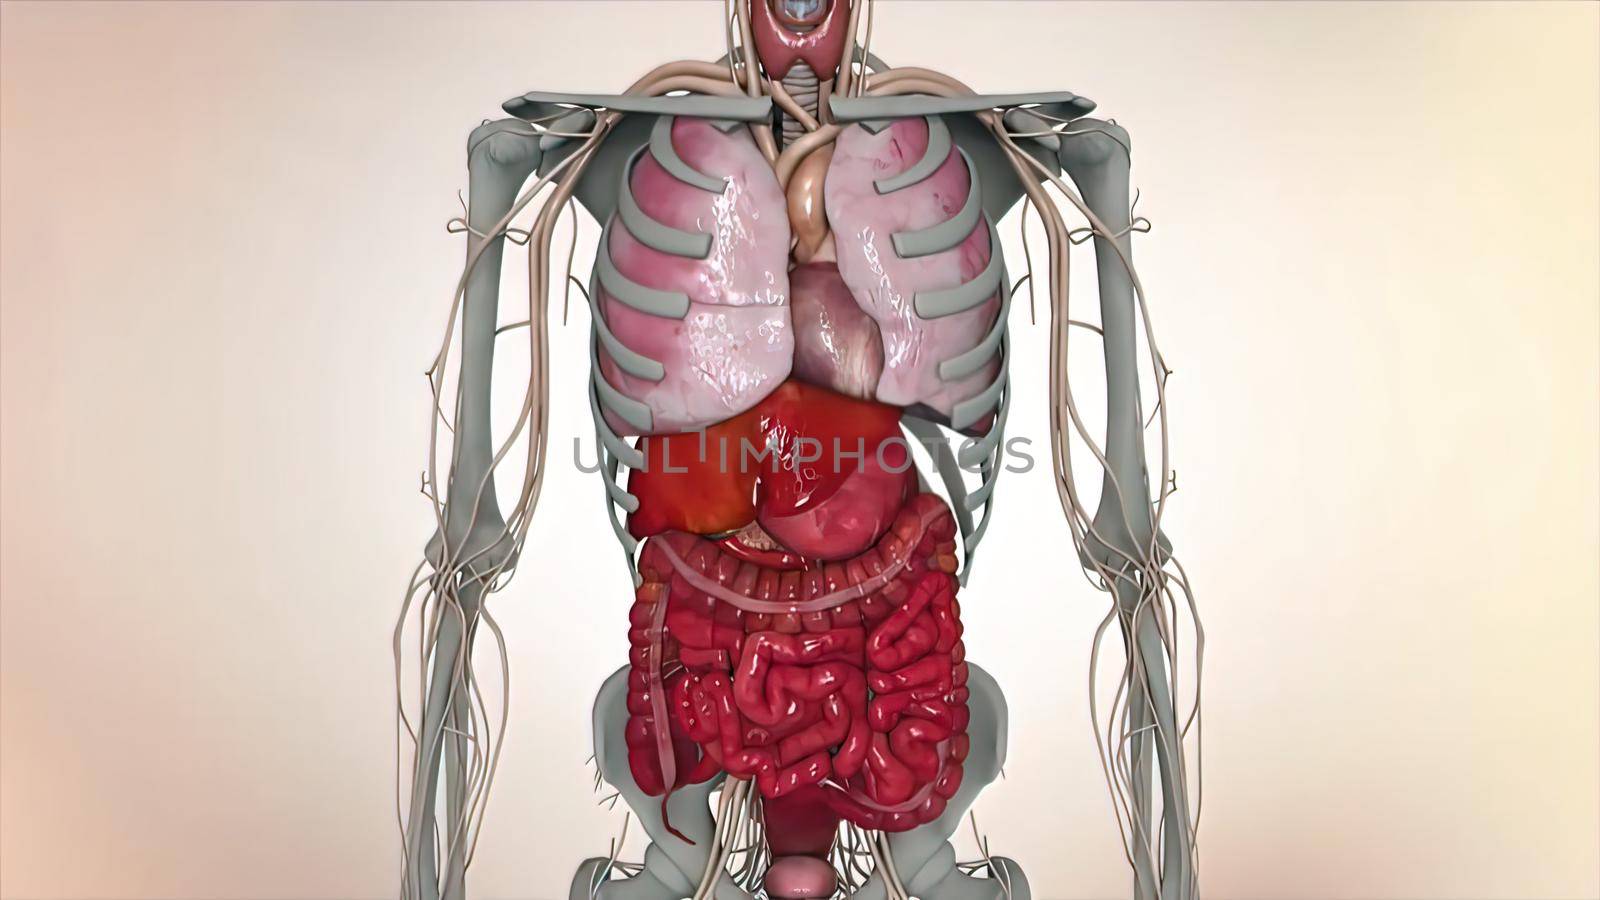 These external organs include the penis, scrotum and testicles. Internal organs include the vas deferens, prostate and urethra 3D illustration